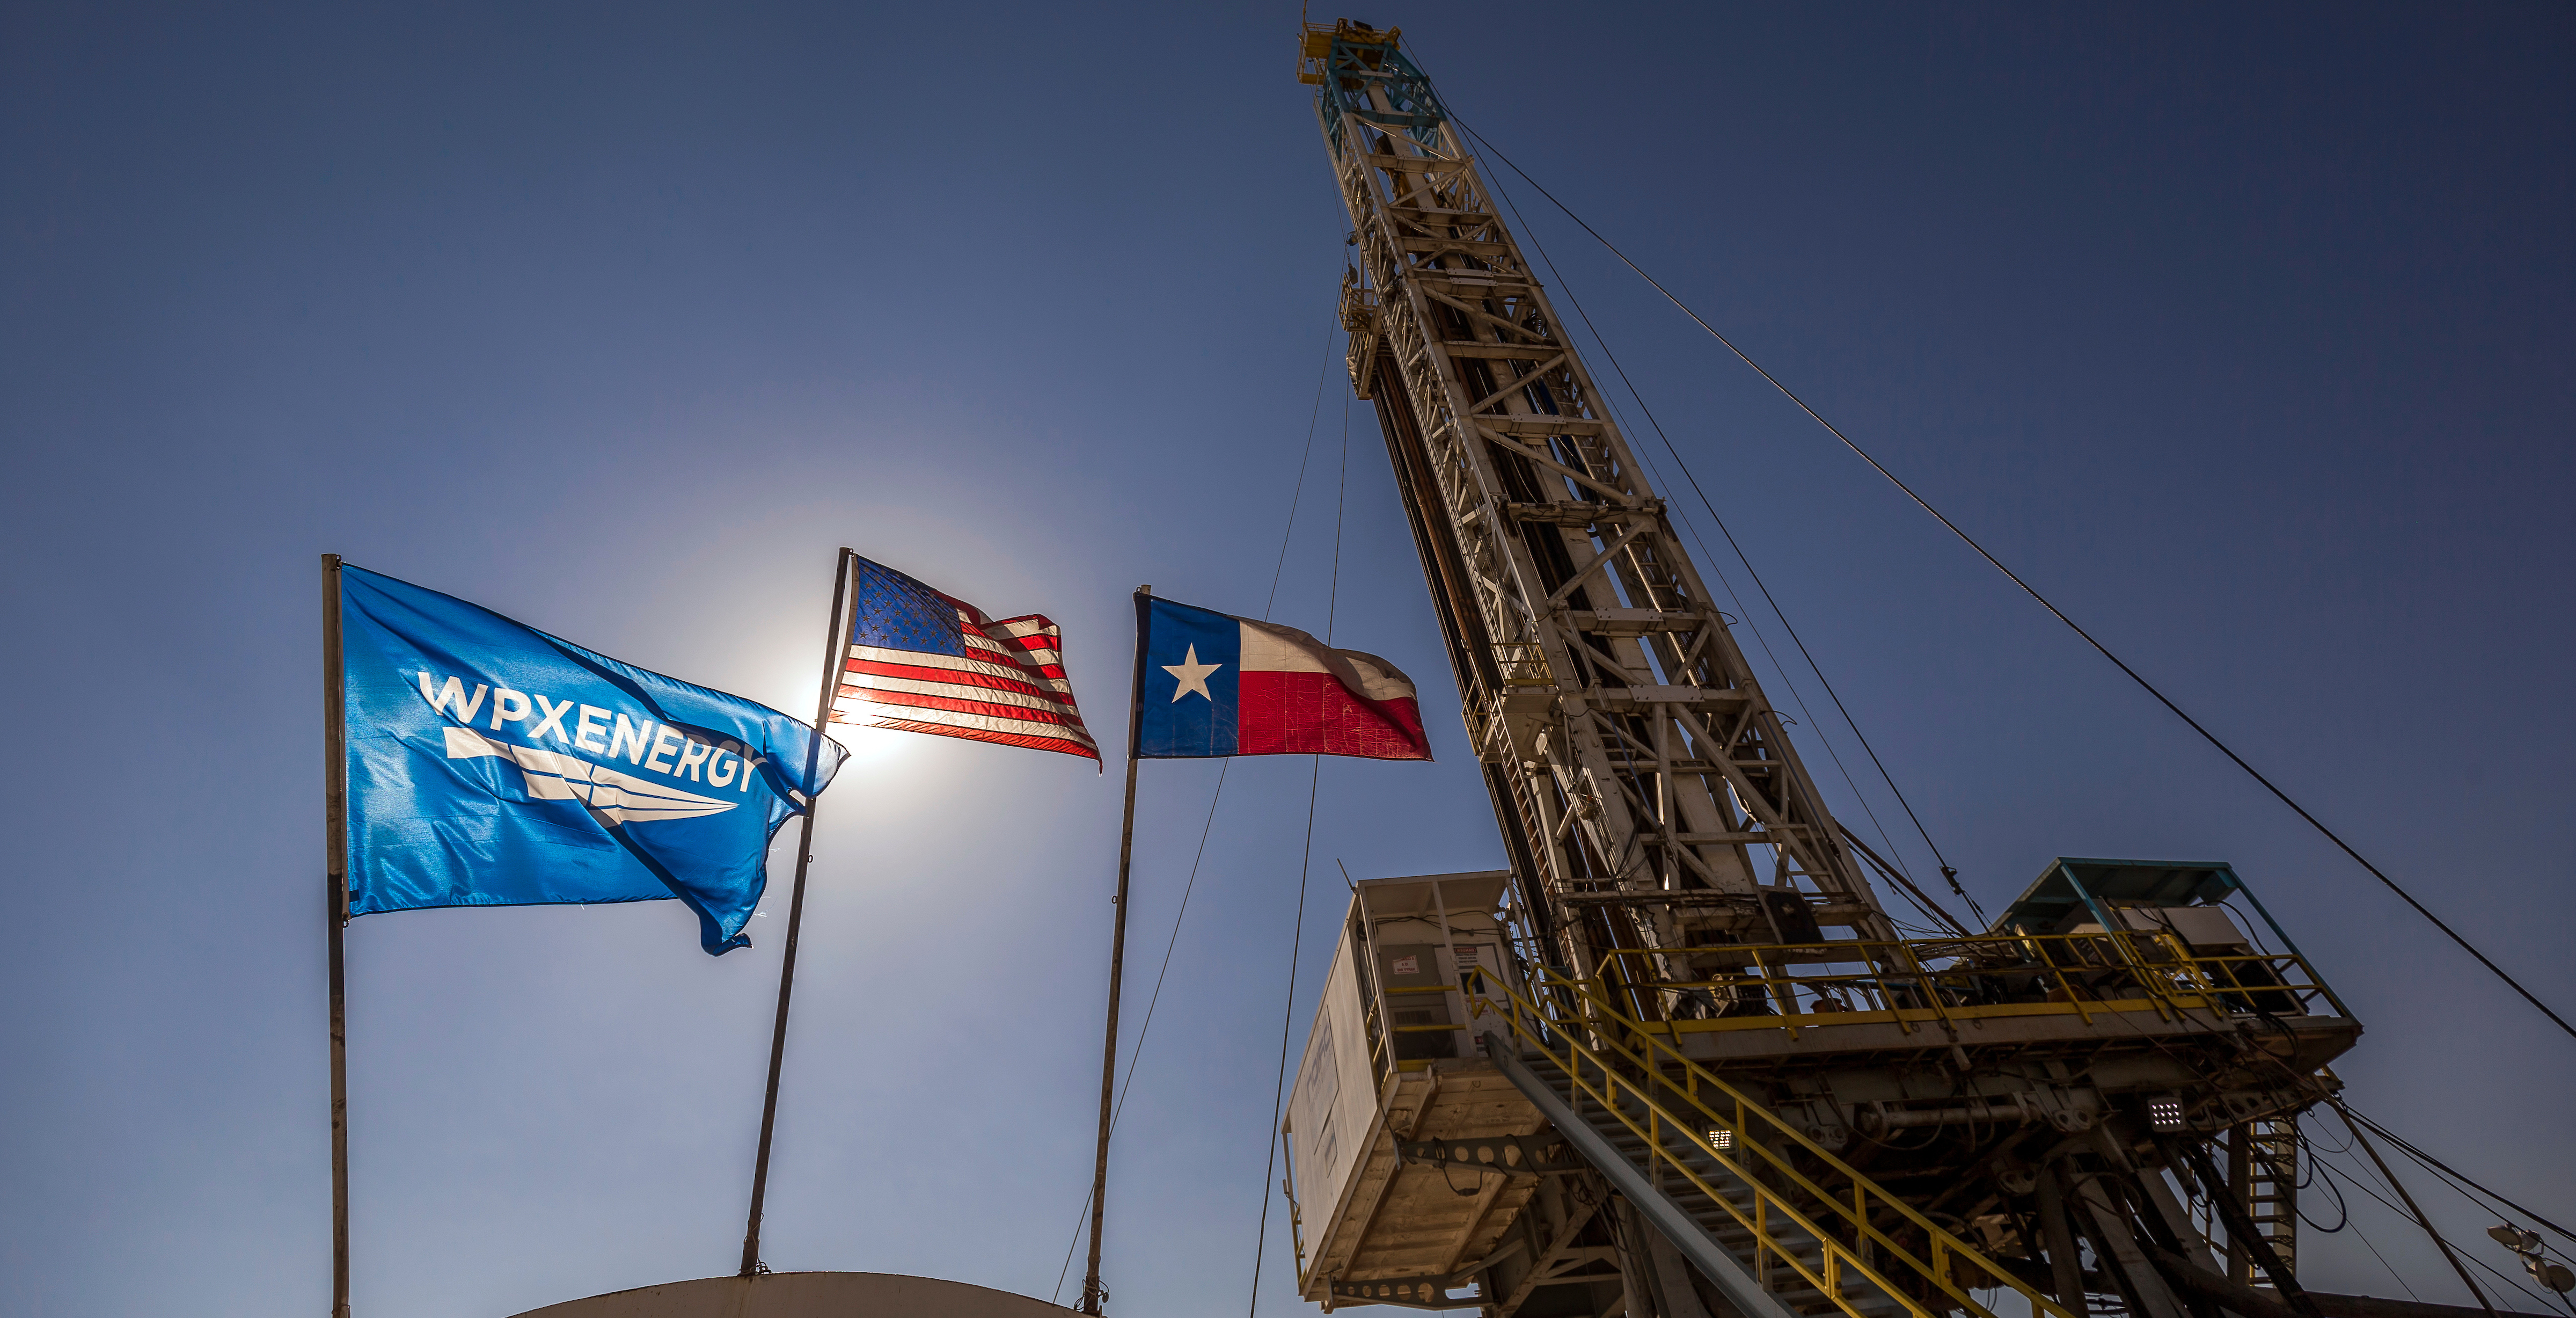 WPX has reduced its Delaware Basin well costs by 22% year over year, driven by a coring and technical project on its Pecos State pad. (Source: WPX Energy)